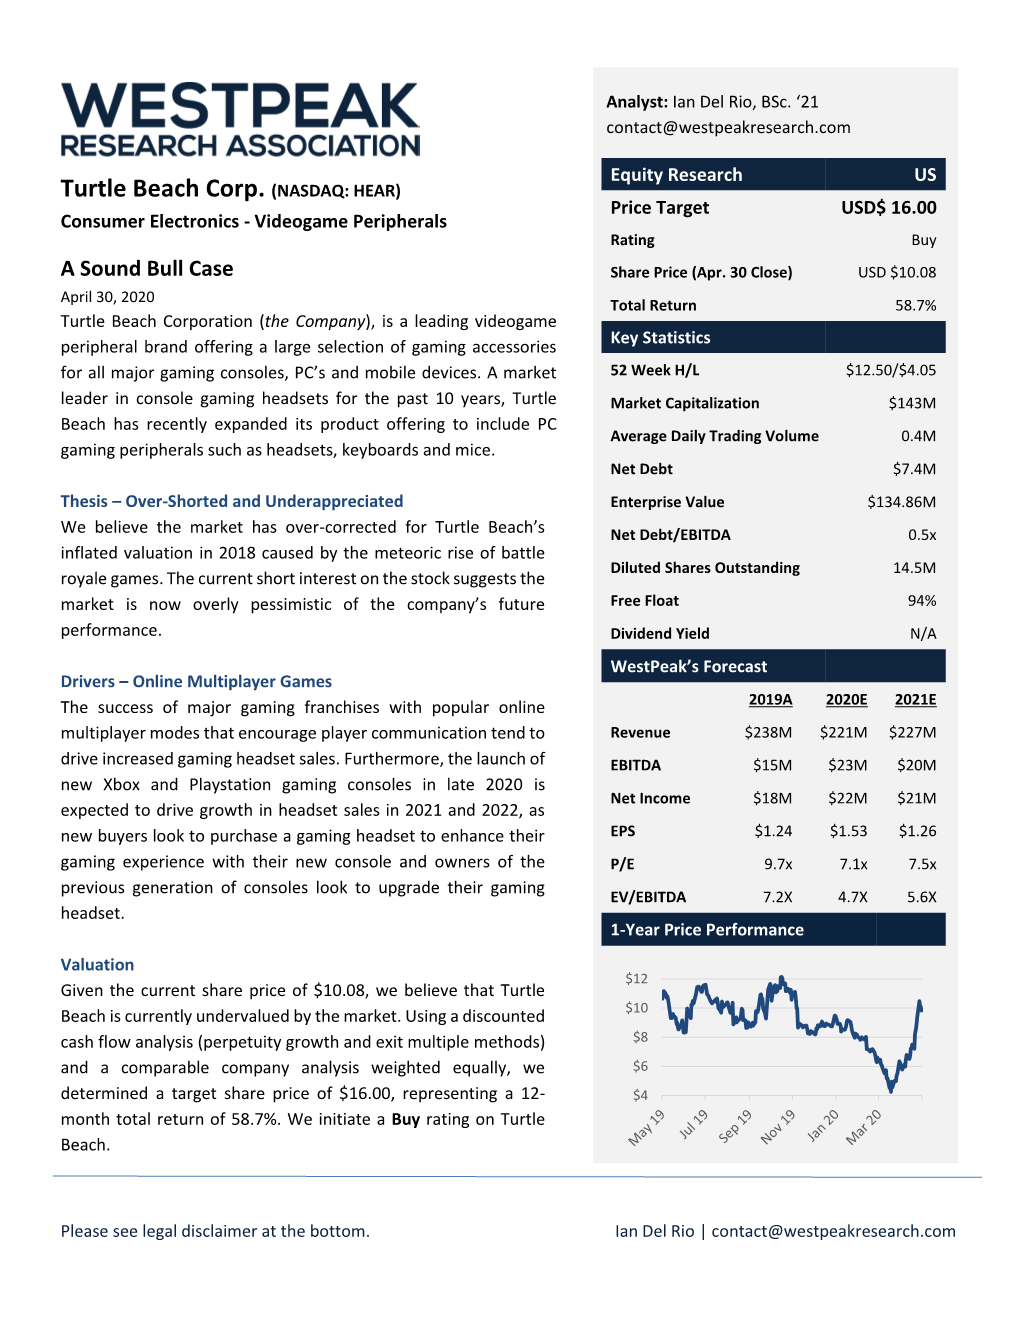 Turtle Beach Corp. (NASDAQ: HEAR) Price Target USD$ 16.00 Consumer Electronics - Videogame Peripherals Rating Buy a Sound Bull Case Share Price (Apr